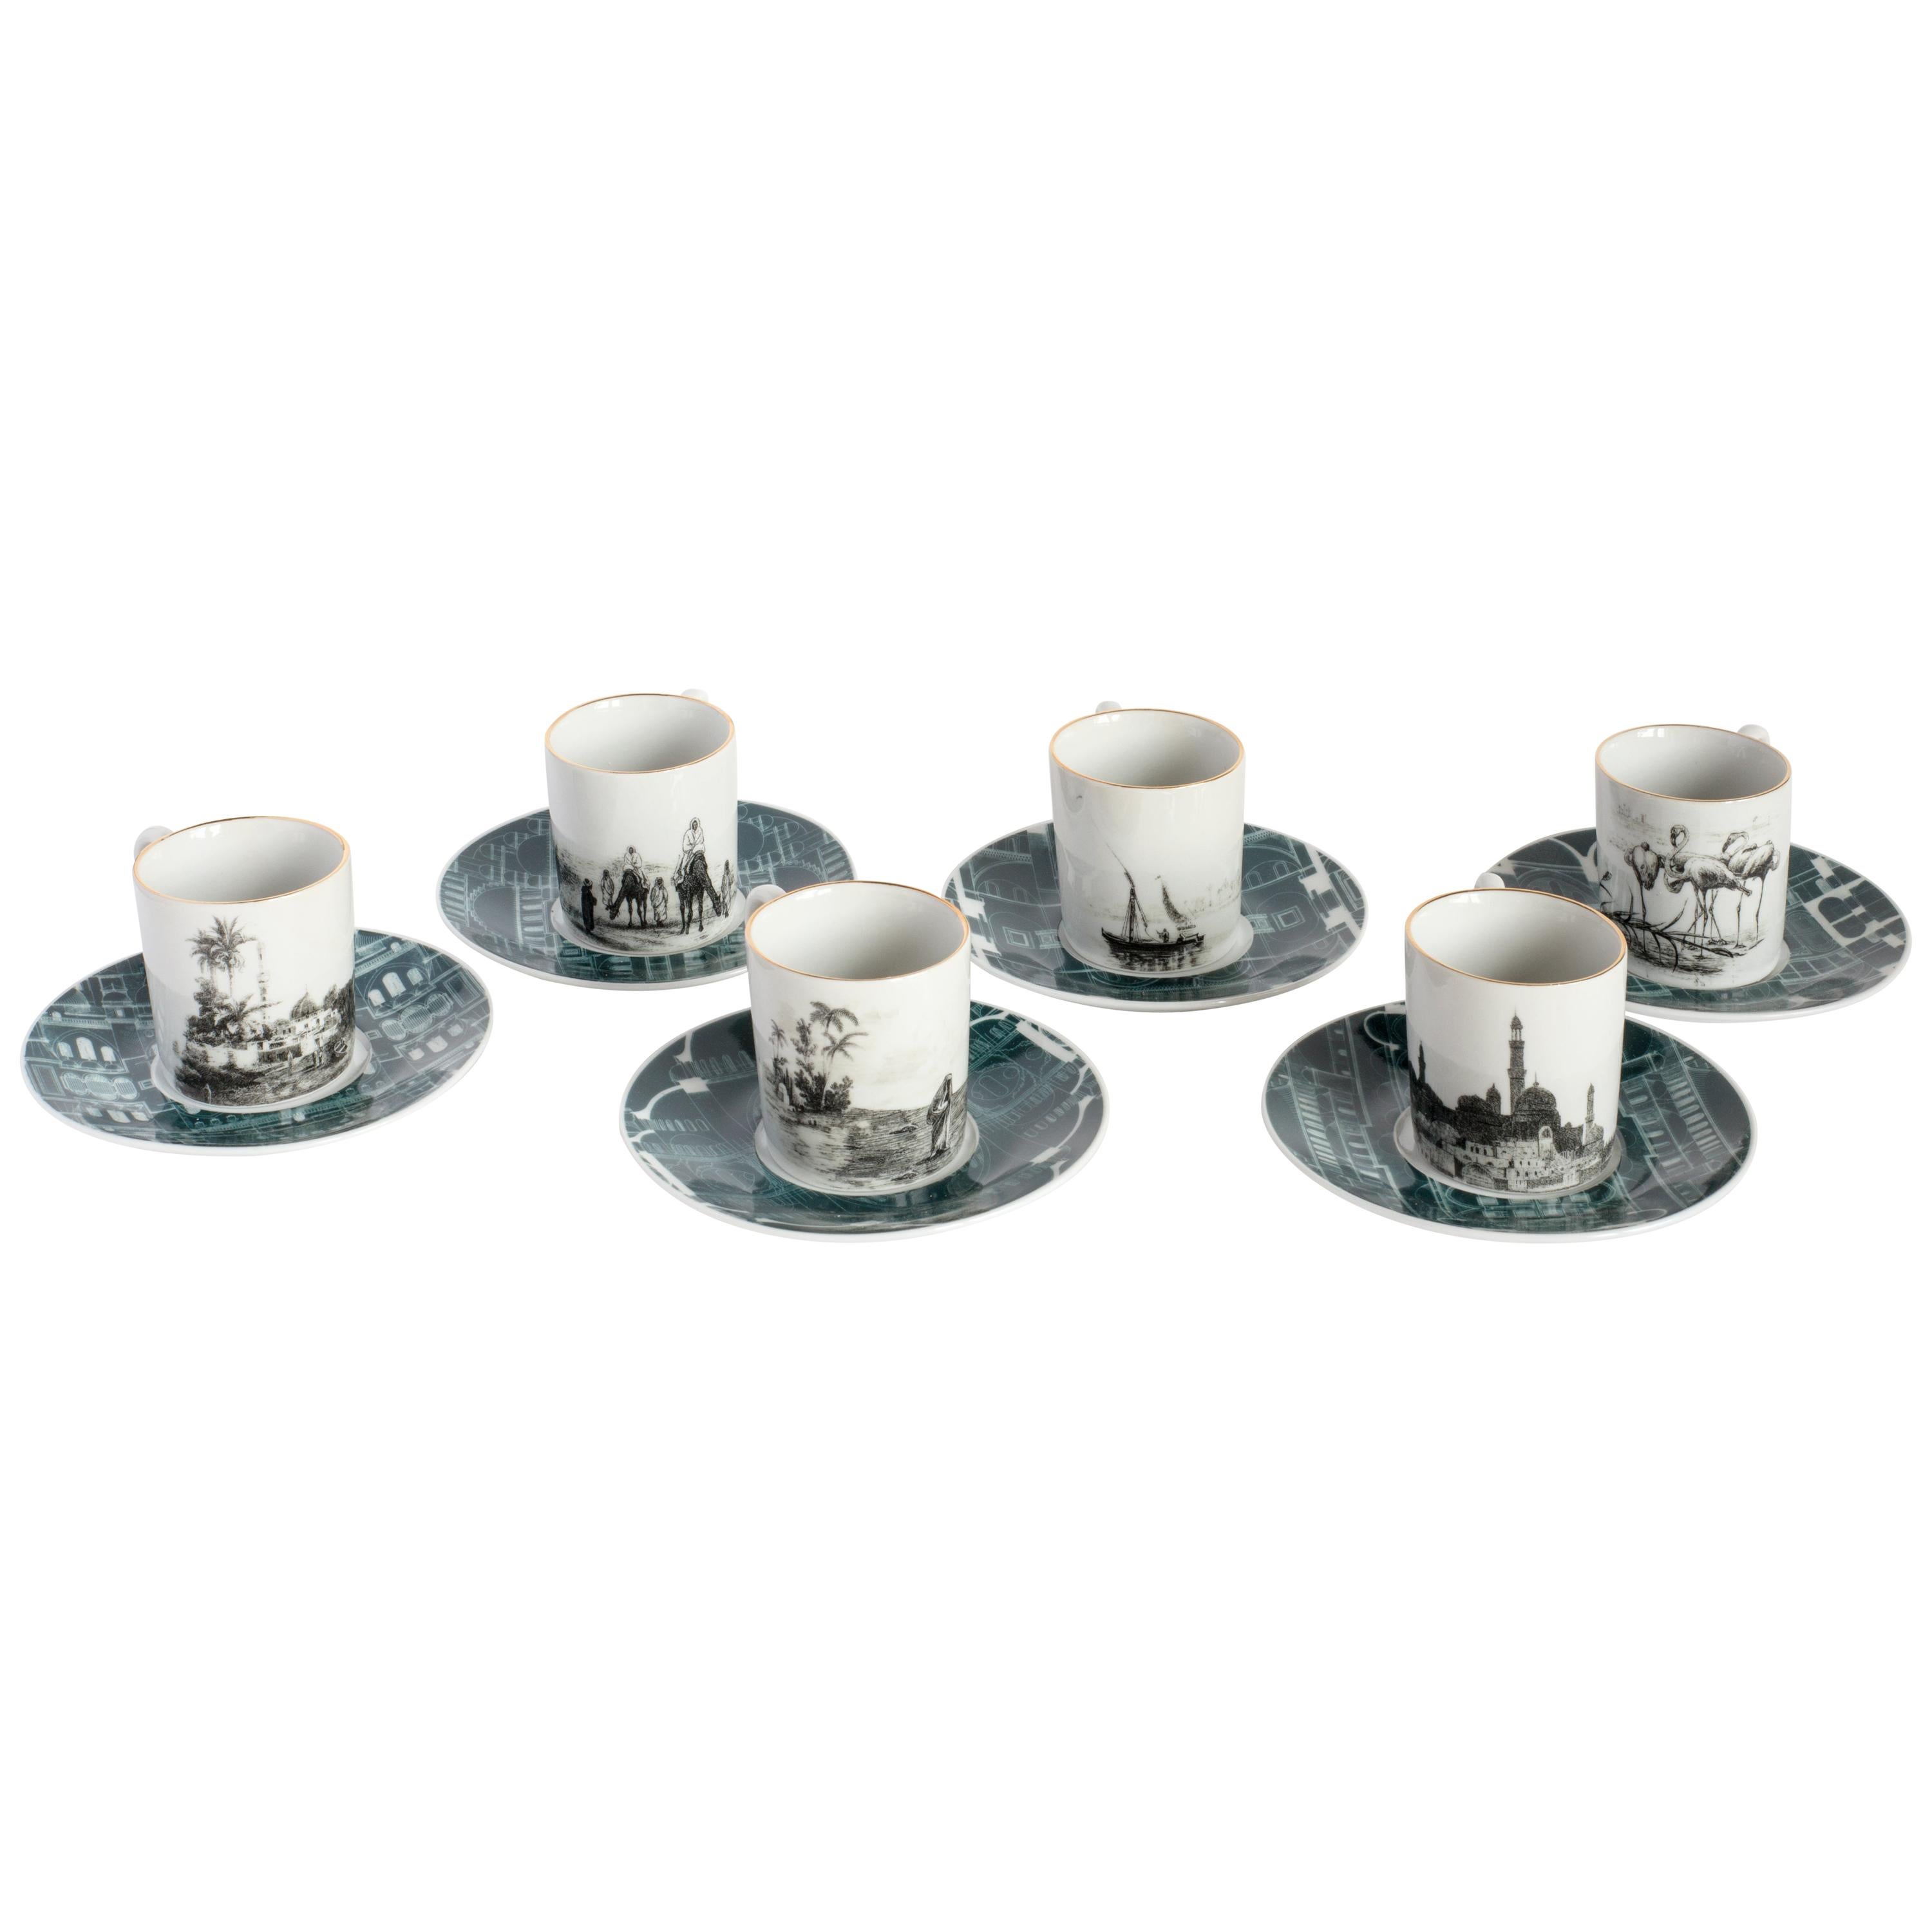 Lebanon, Coffee Set with Six Contemporary Porcelains with Decorative Design